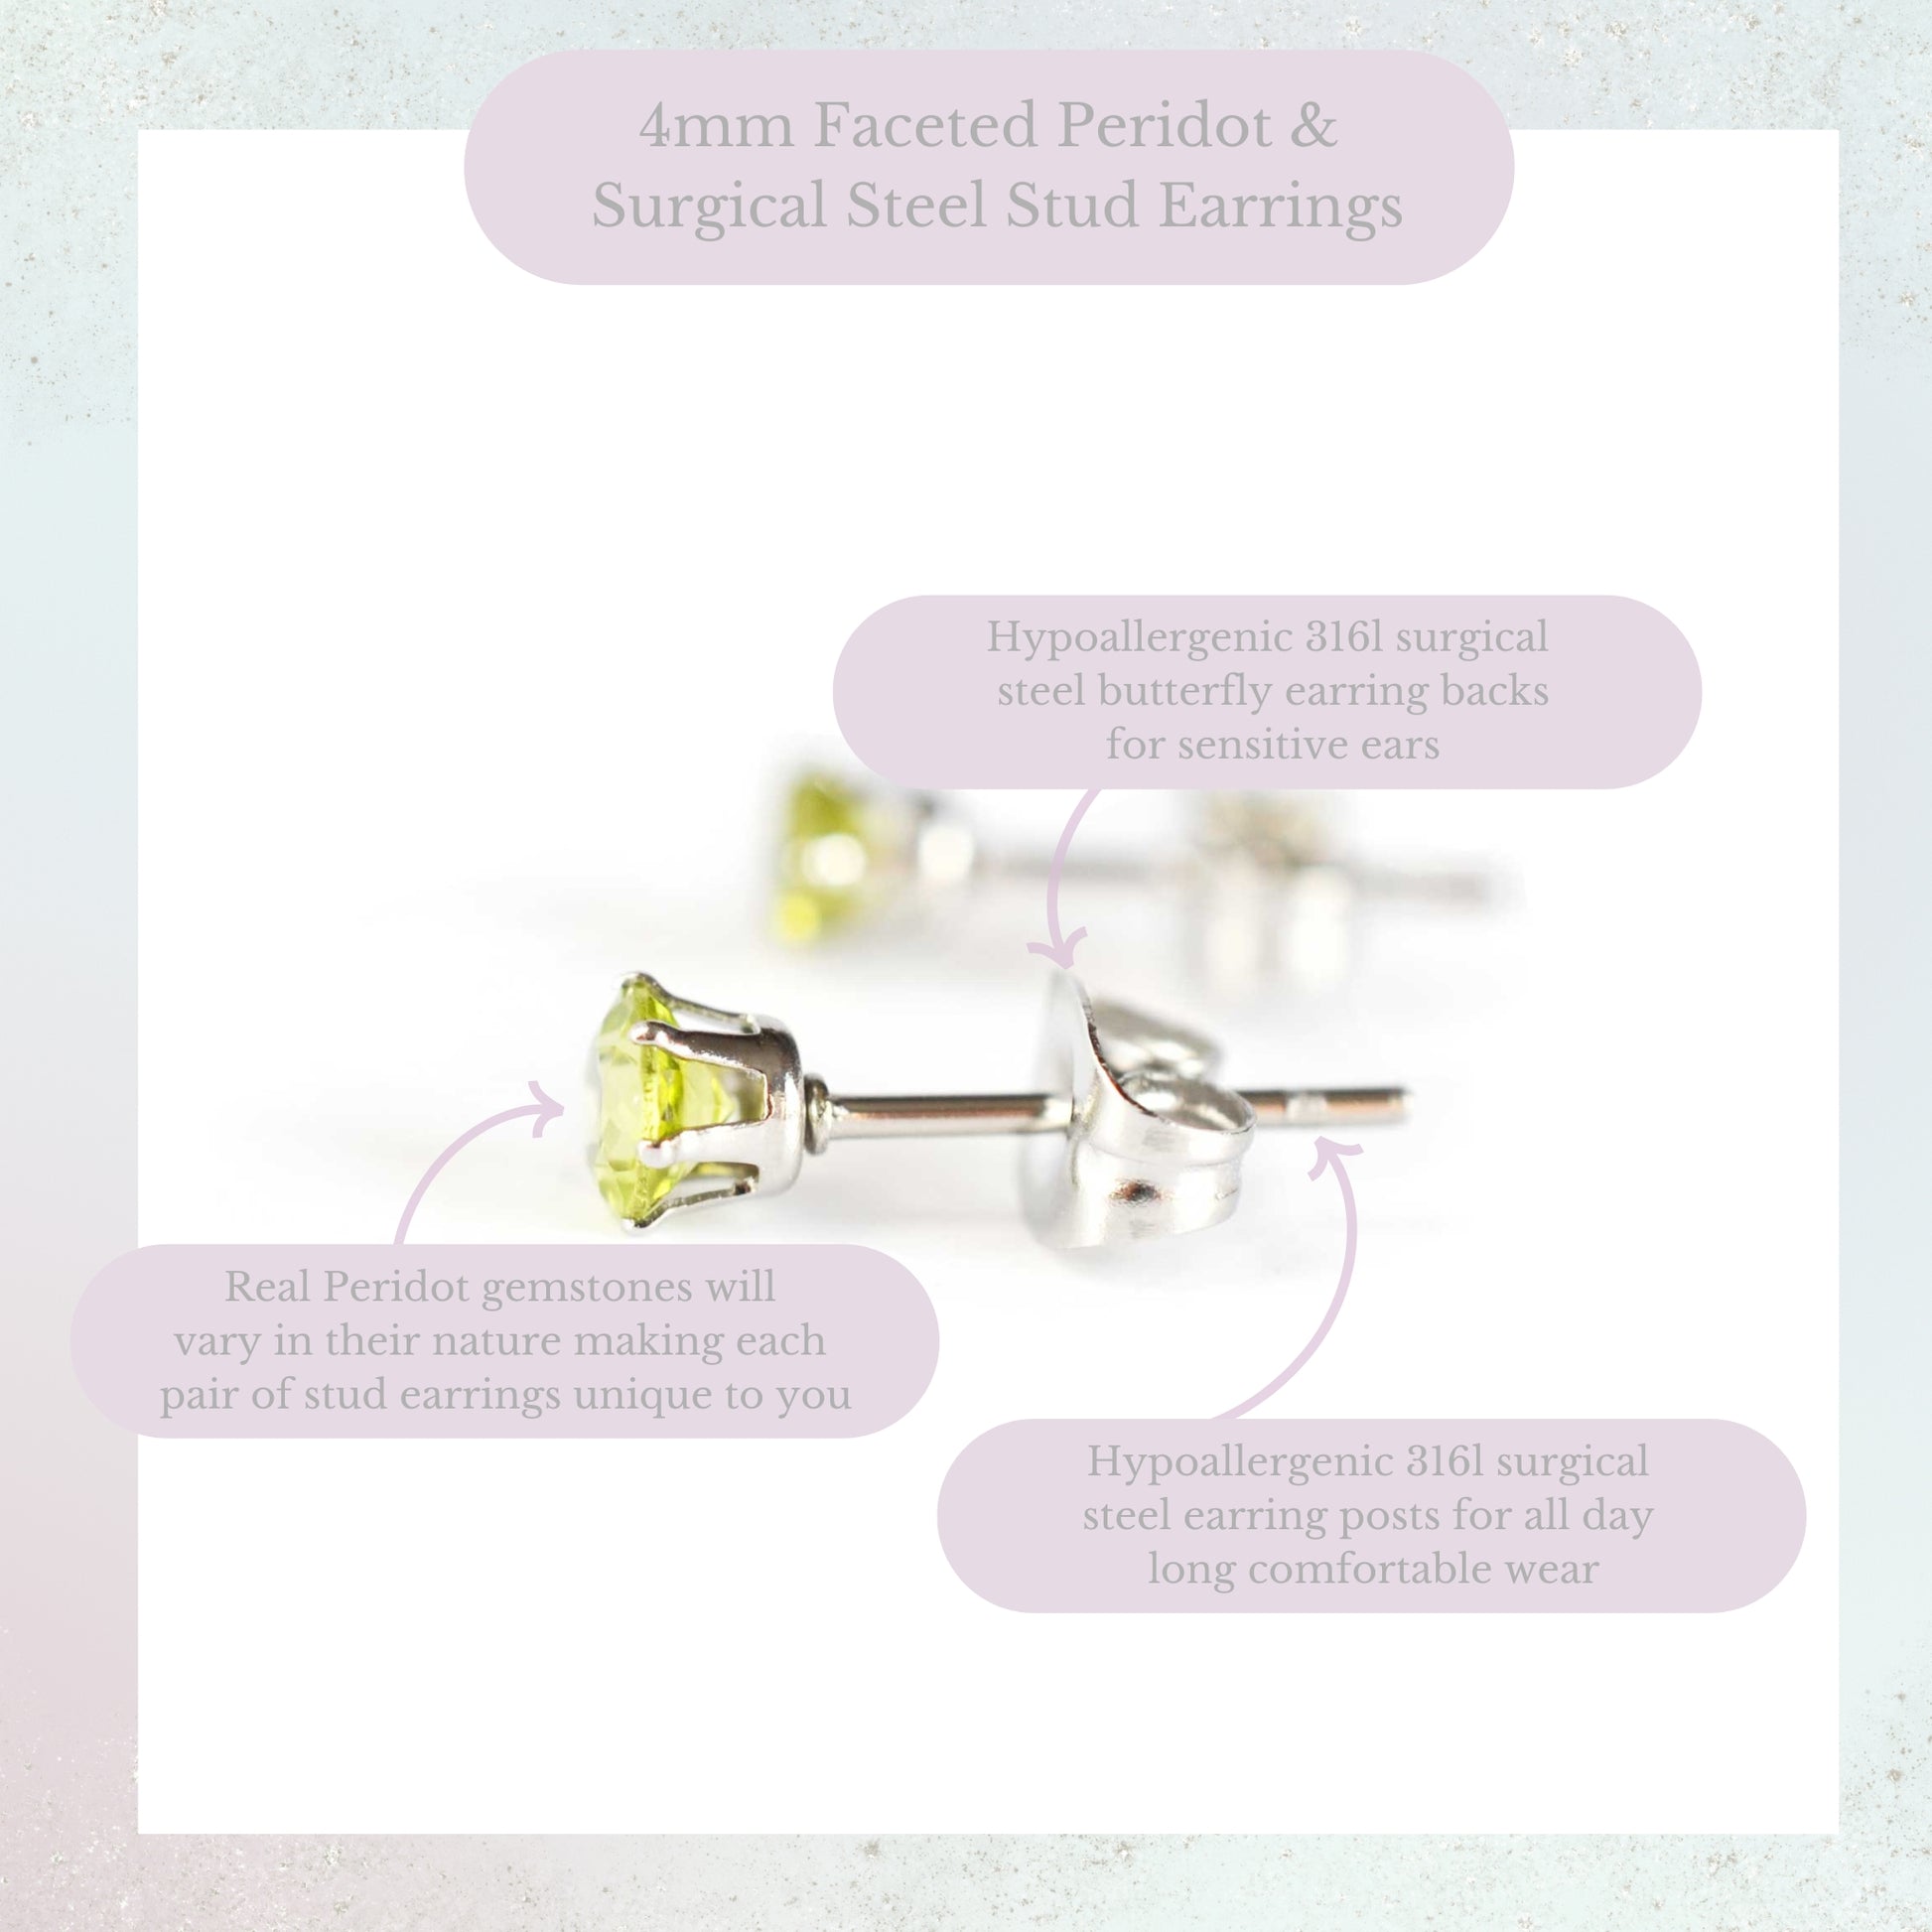 Product information graphic for 4mm faceted Peridot stud earrings